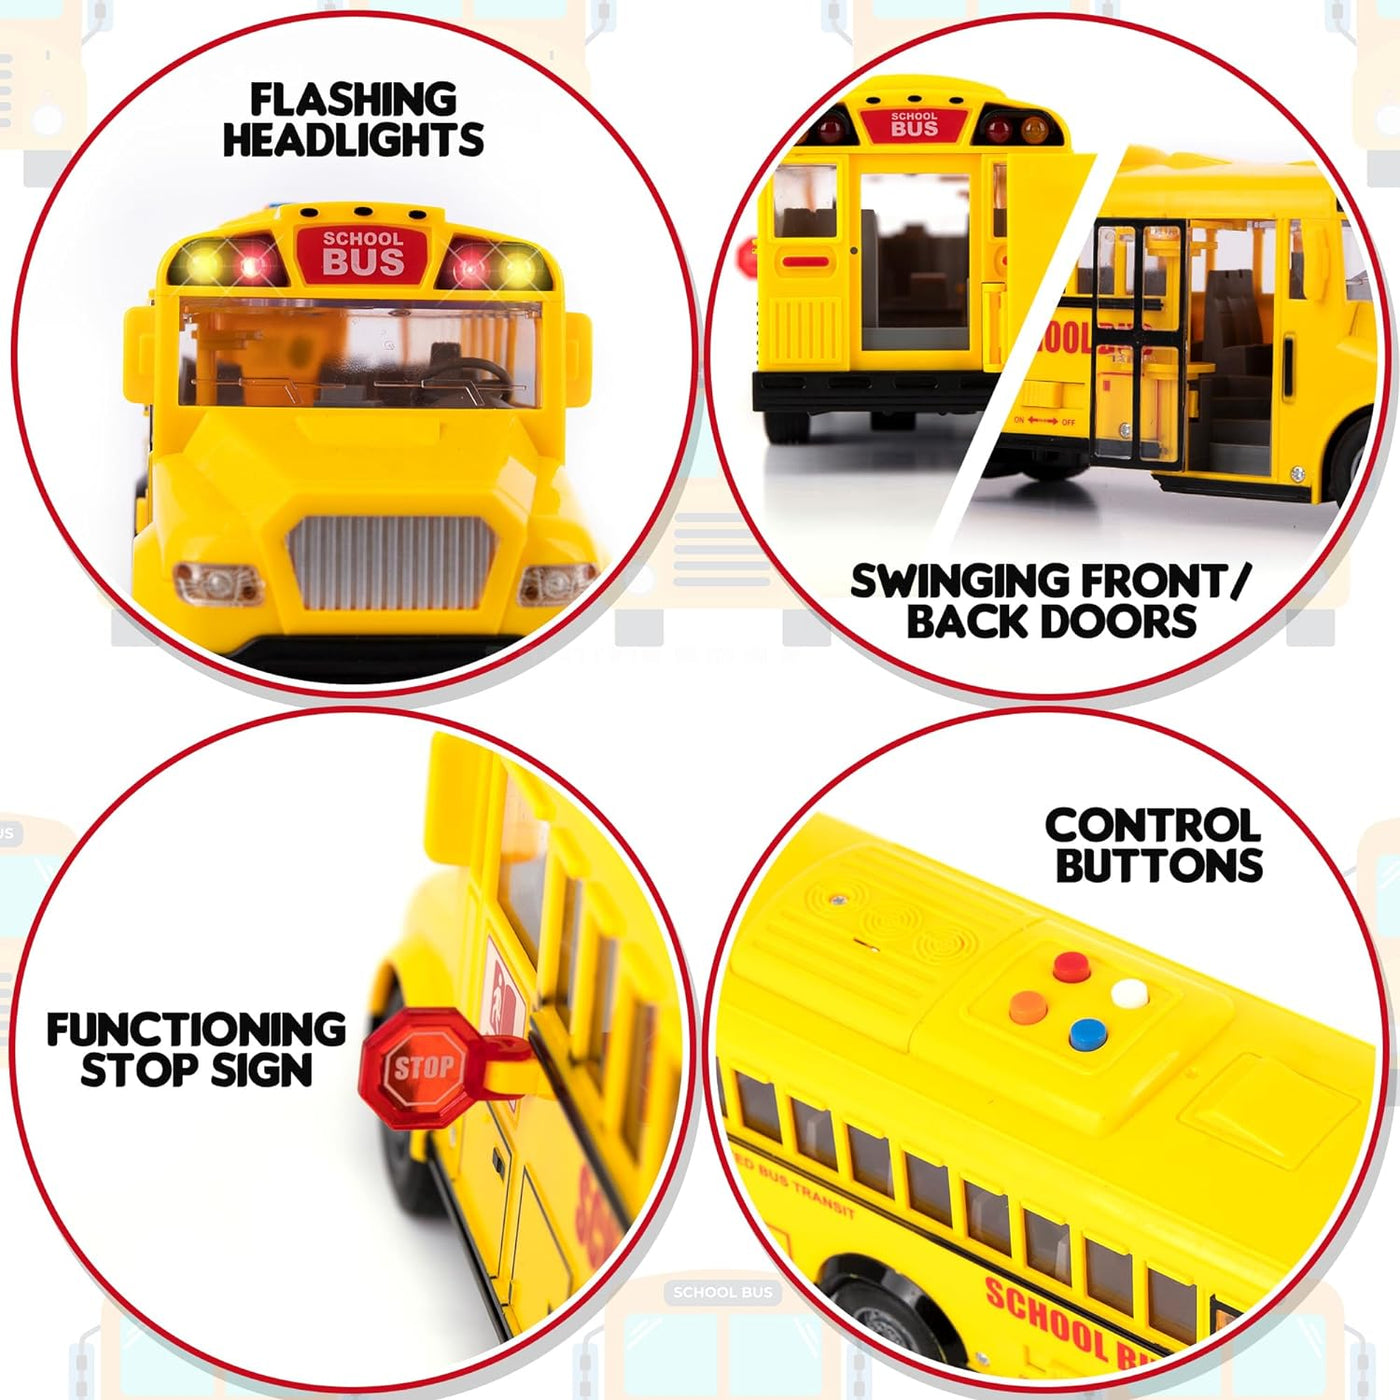 Yellow School Bus Toy with Flashing Lights & Sound, Friction Powered 1/16 Scale School Bus Toy for Kids with 4 Different Sounds & Lights, Back and Side Doors Open, Great Gift Idea for Kids Ages 3+